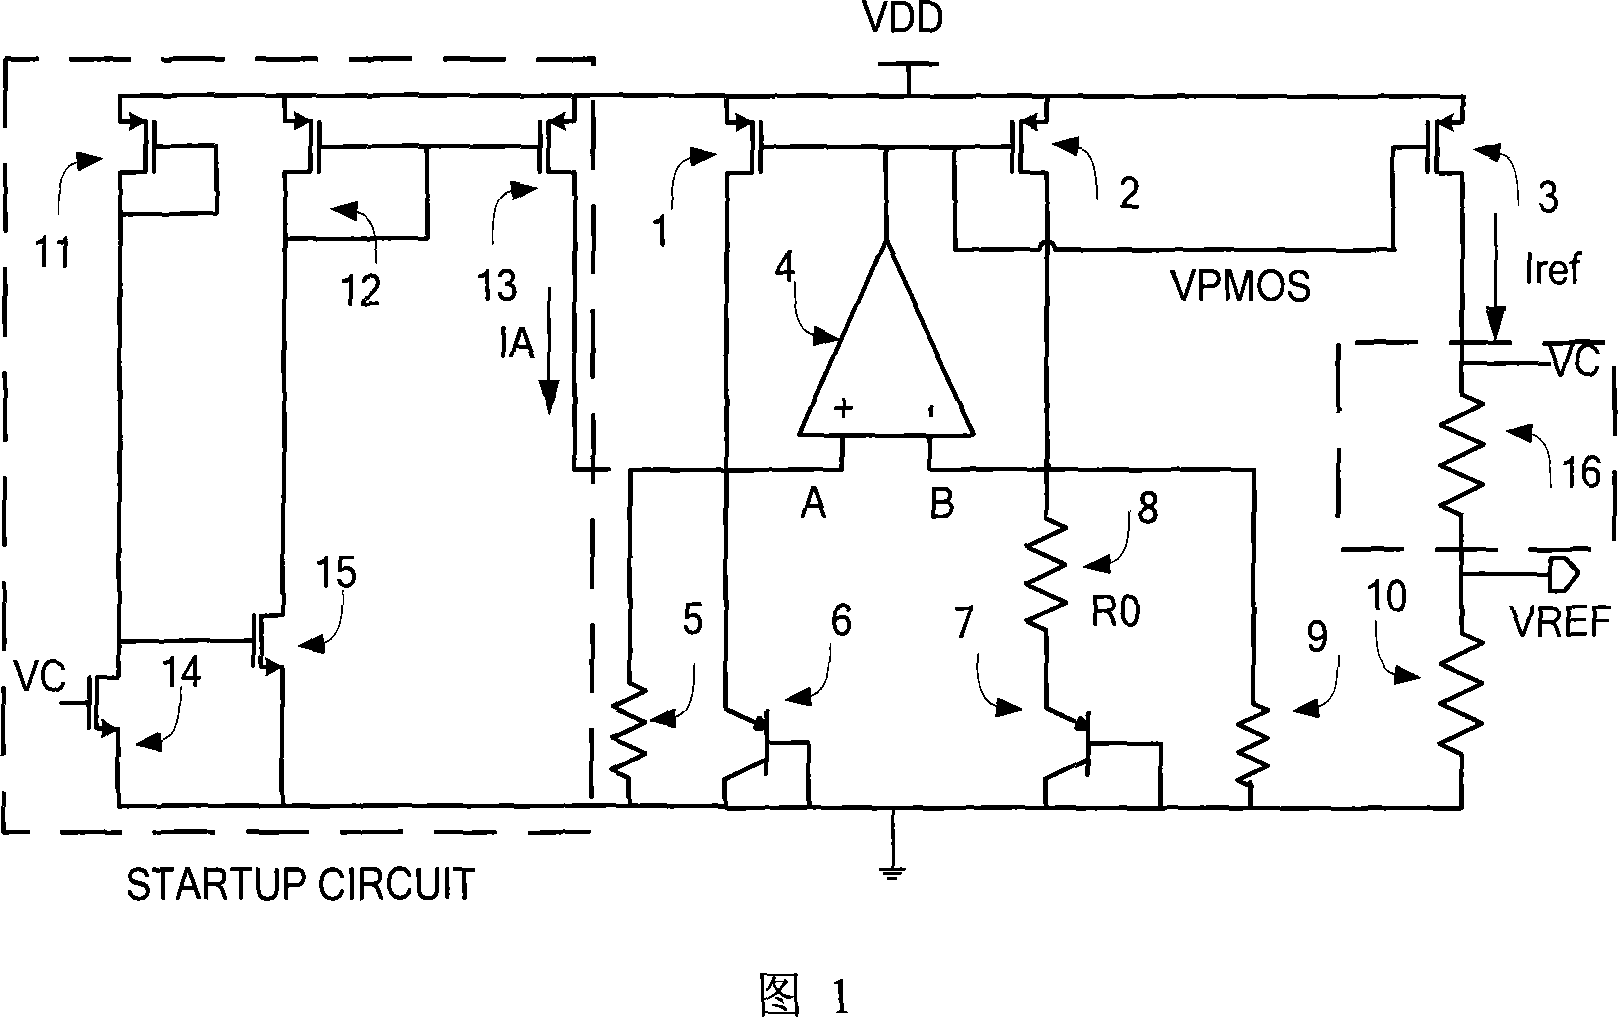 Start circuit for mass production of reference voltage source suitable for Sub1V current mode